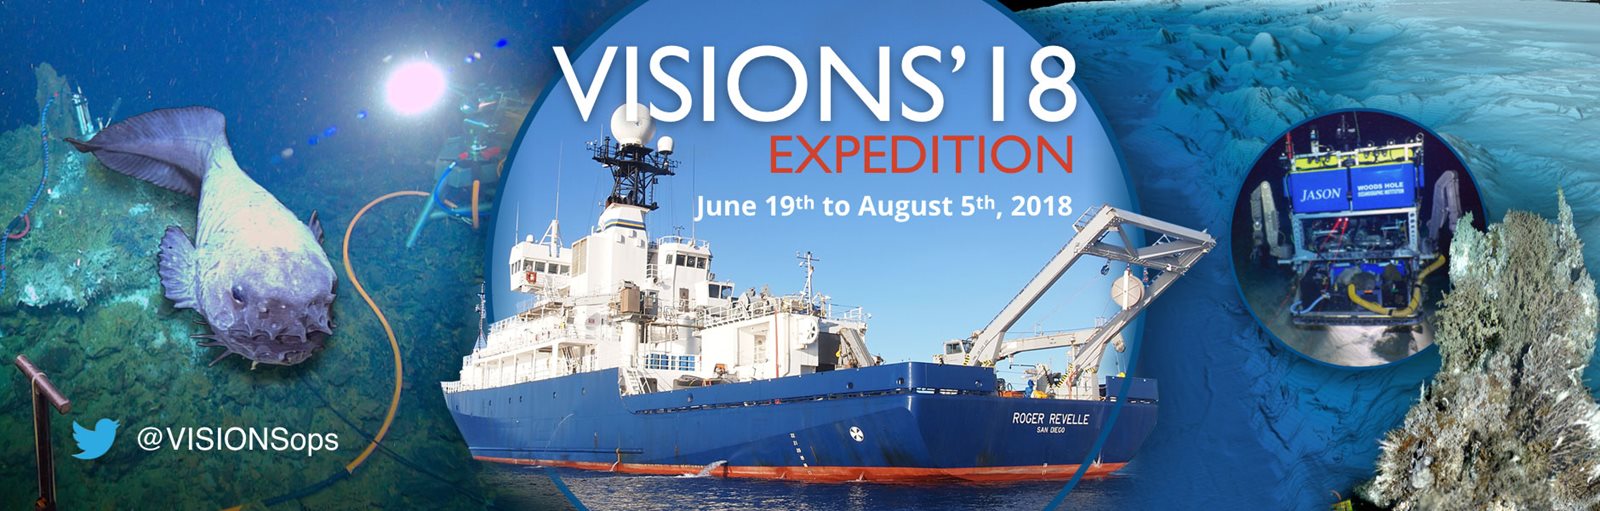 Visions 18 banner